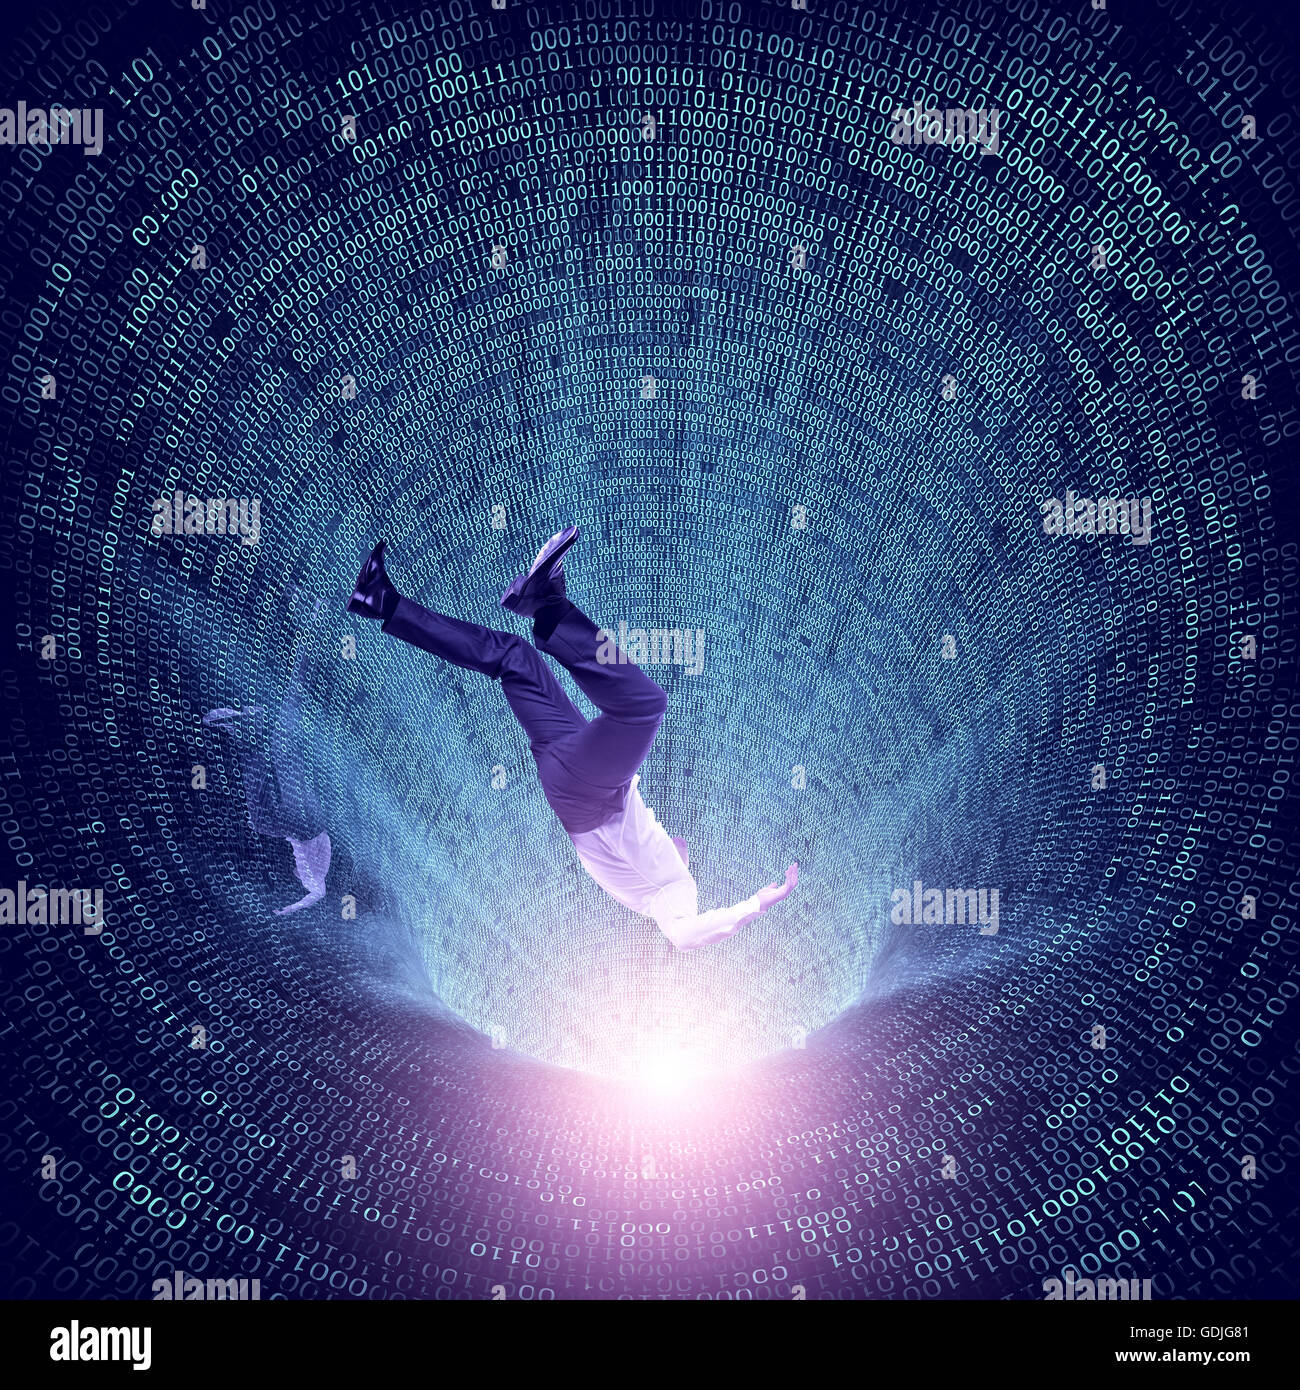 classic binary code 3d background and falling man Stock Photo